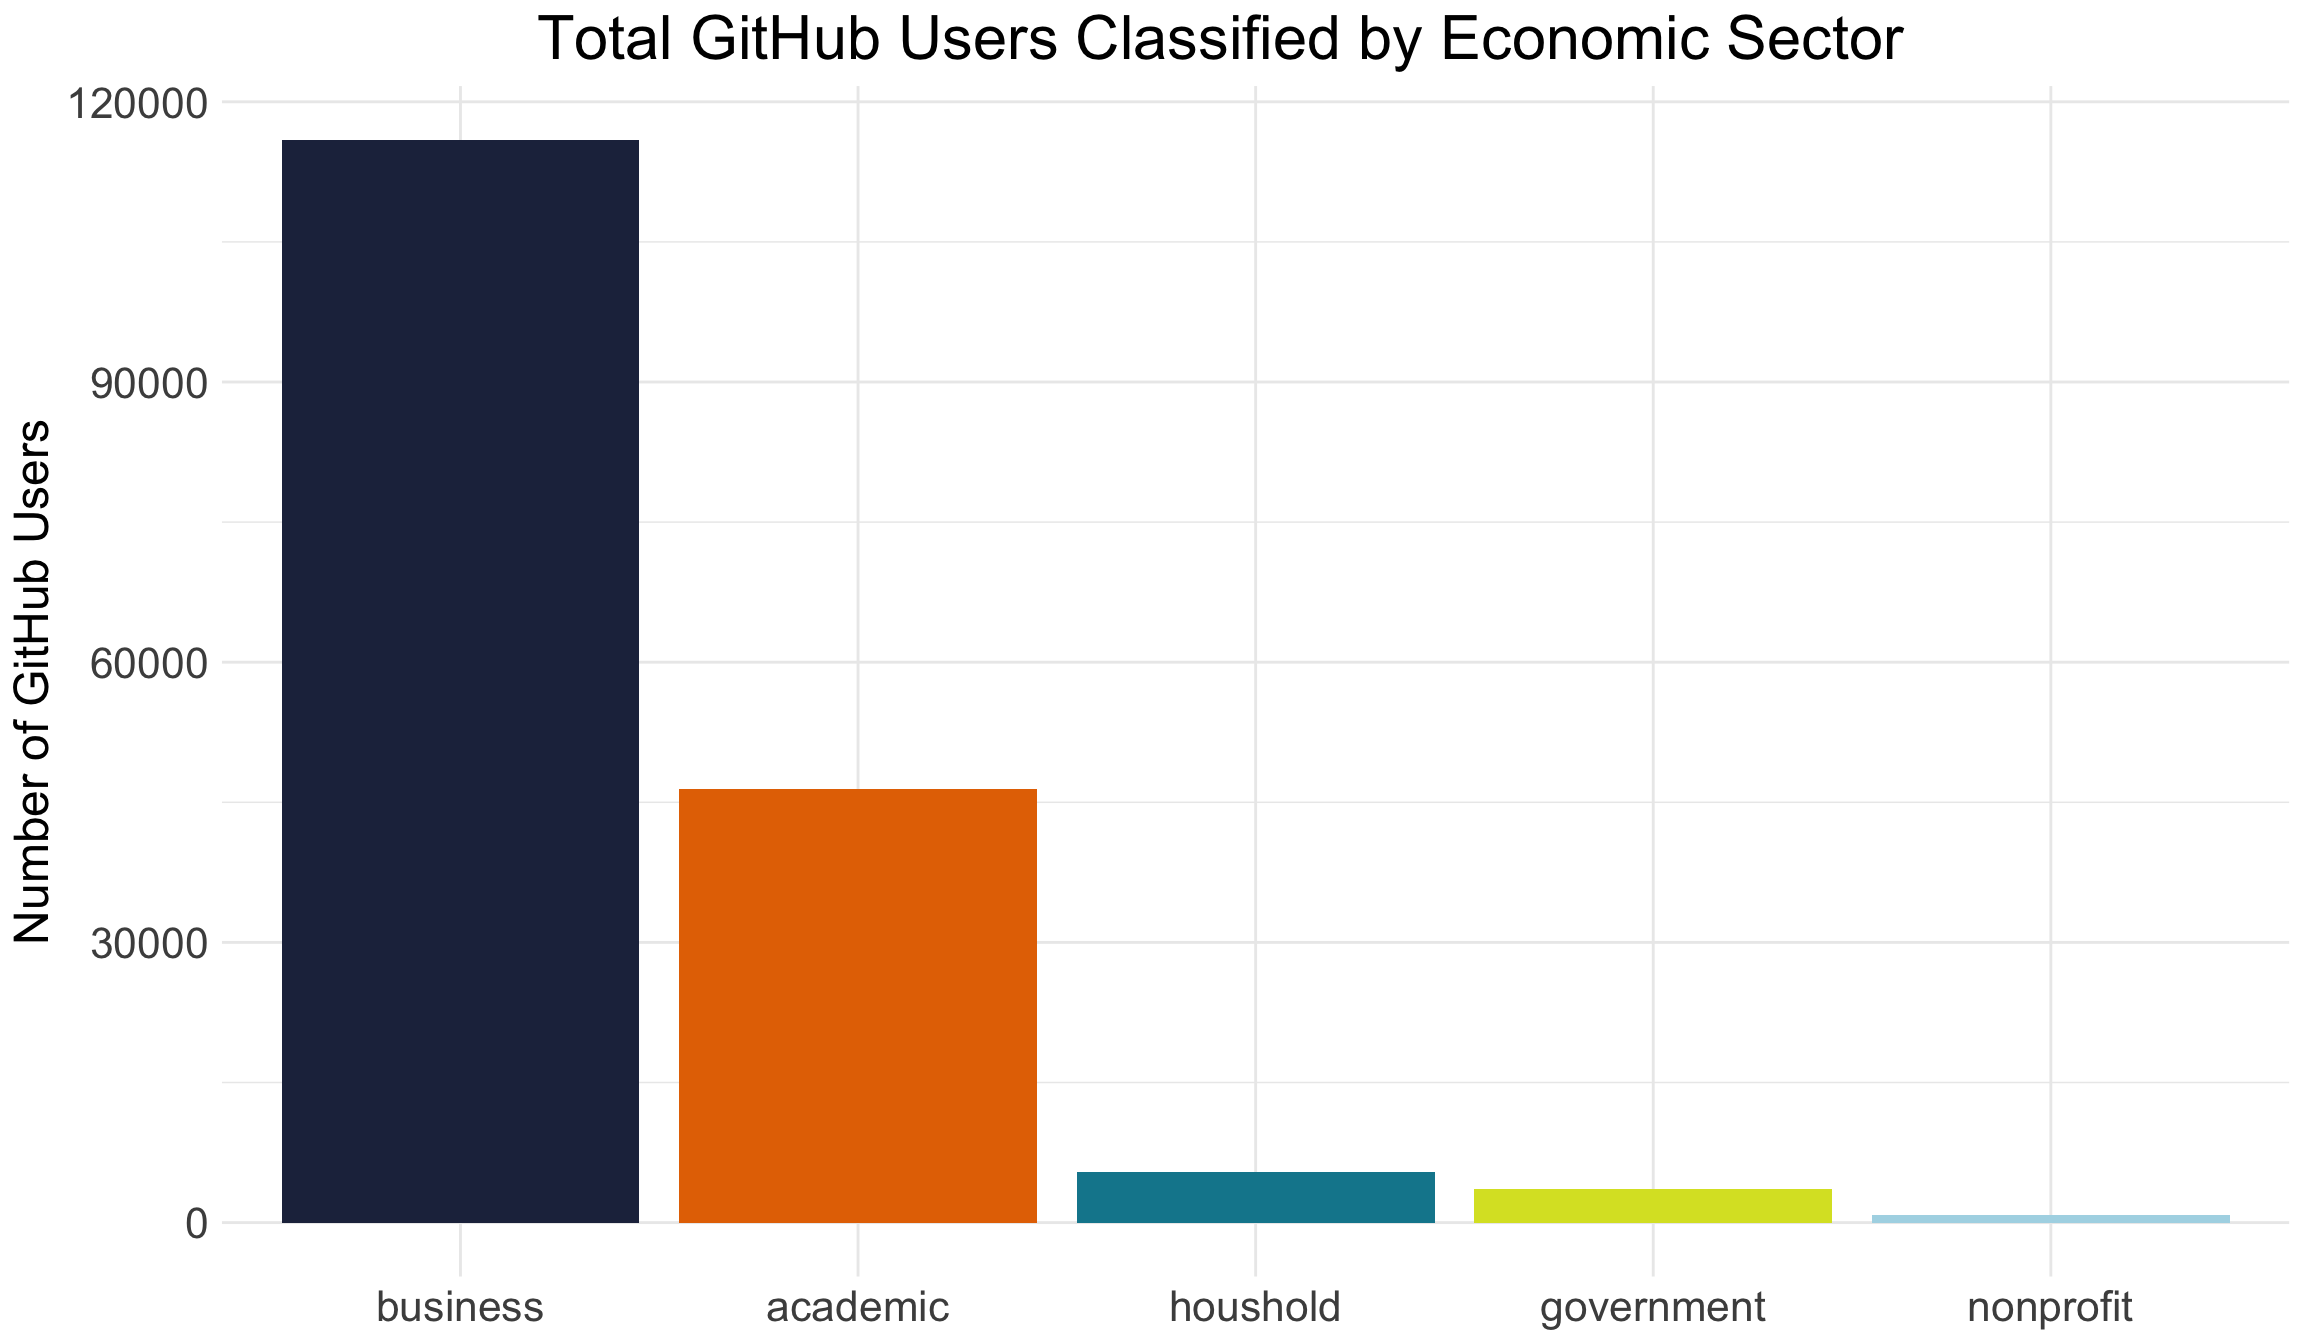 Our original GHTorrent data contained ~2.1 million users. Of these total users, only 578,852 (or 27%) had valid email information while only 422,517 (or 19.7%) had valid affiliation information. Working from this subset, we were able to classify 46,403 users into the academic sector, 5,455 users into the household sector, 3,576 users into the government sector and 823 users into the non-profit sector. After removing users that provided an organization that was listed fewer than five times, this left us with around 116,000 users that we allocated to the business sector.